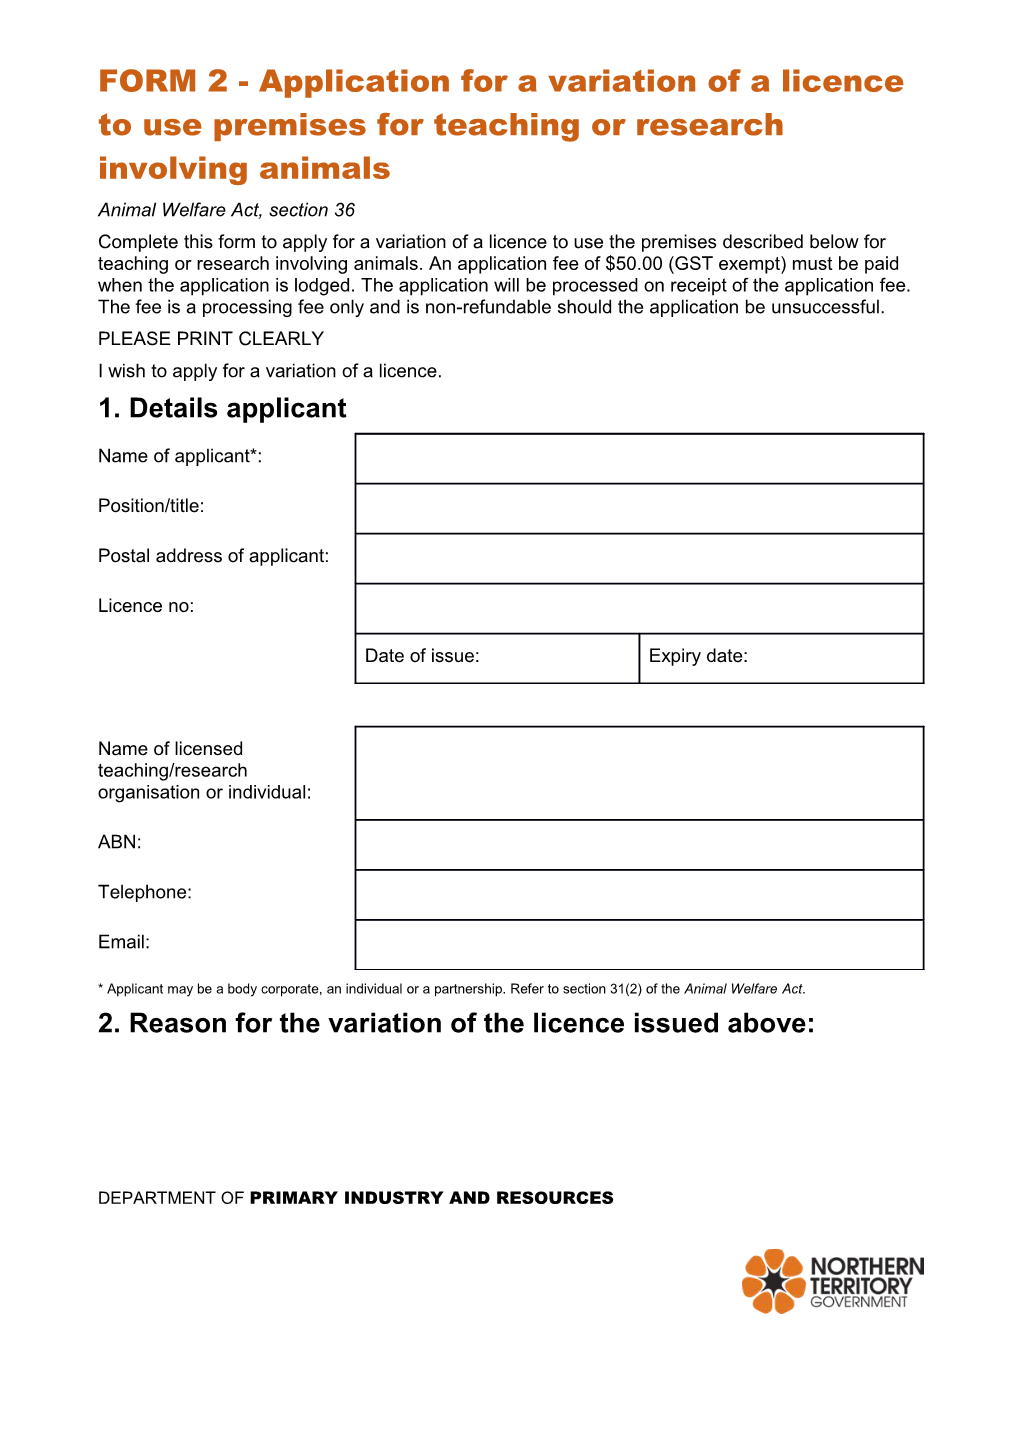 FORM 2 - Application for a Variation of a Licence to Use Premises for Teaching Or Research